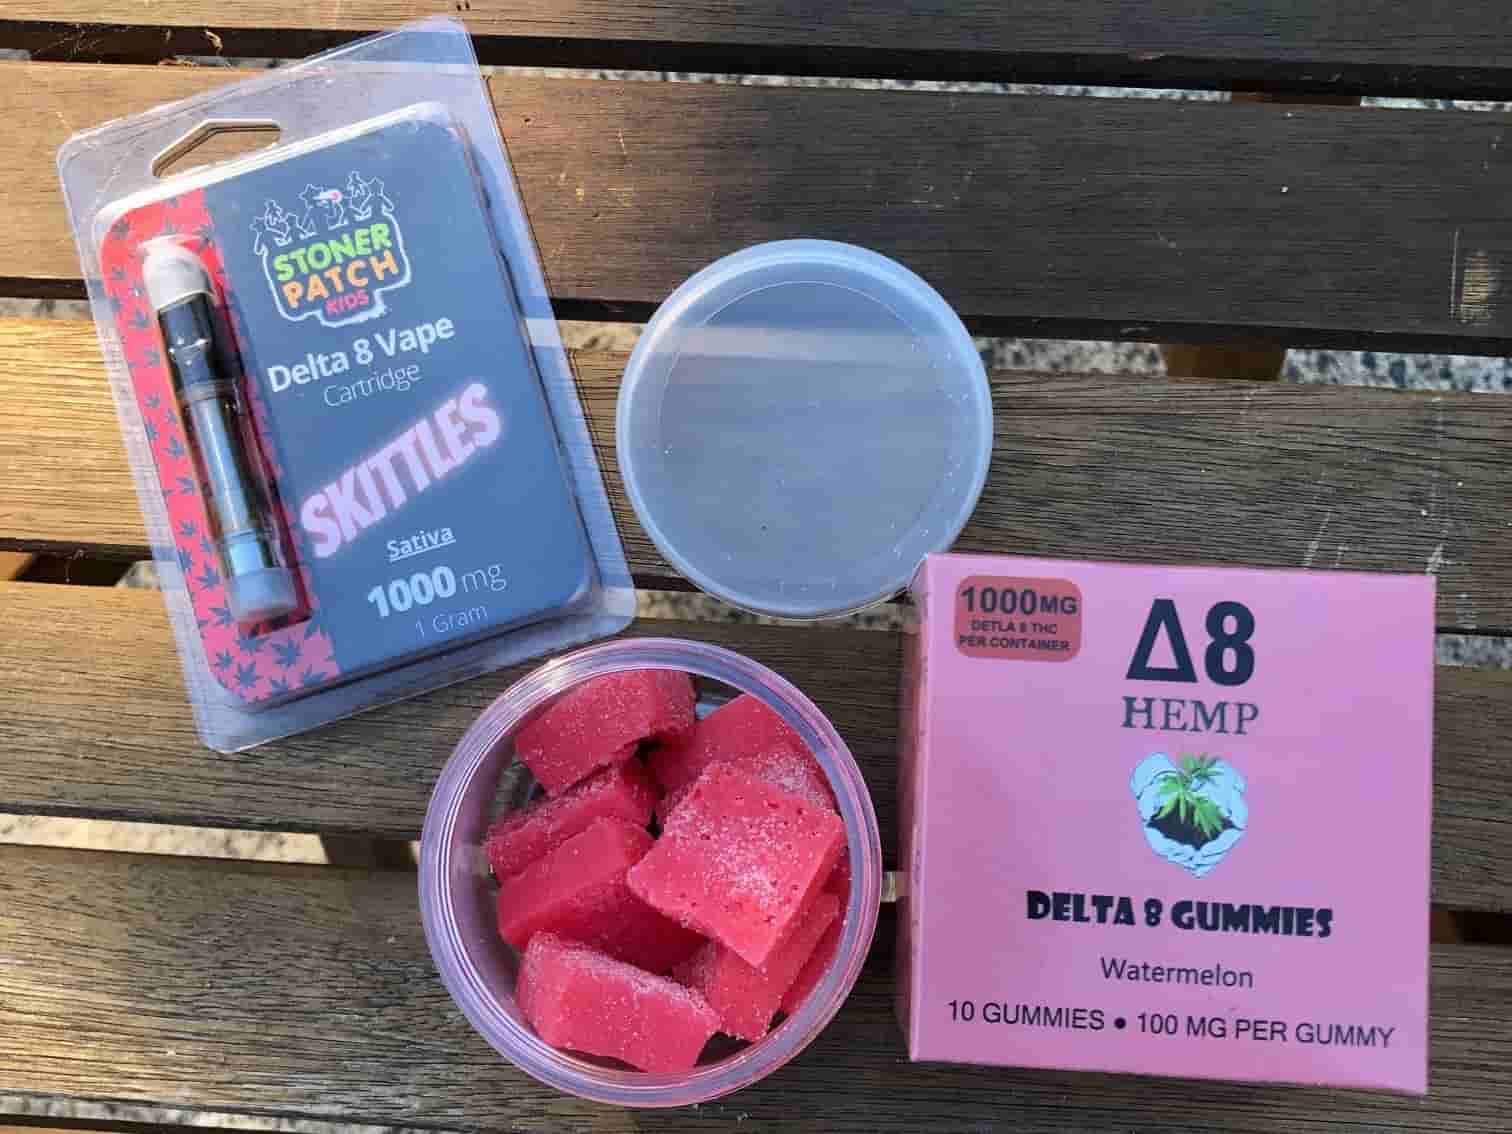 DELTA 8 SYSTEMS - Gummies|Thc|Products|Hemp|Product|Brand|Effects|Delta|Gummy|Cbd|Origin|Quality|Dosage|Delta-8|Dose|Usasource|Flavors|Brands|Ingredients|Range|Customers|Edibles|Cartridges|Reviews|Side|List|Health|Cannabis|Lab|Customer|Options|Benefits|Overviewproducts|Research|Time|Market|Drug|Farms|Party|People|Delta-8 Thc|Delta-8 Products|Delta-9 Thc|Delta-8 Gummies|Delta-8 Thc Products|Delta-8 Brands|Customer Reviews|Brand Overviewproducts|Drug Tests|Free Shipping|Similar Benefits|Vape Cartridges|Hemp Doctor|United States|Third Party Lab|Drug Test|Thc Edibles|Health Canada|Cannabis Plant|Side Effects|Organic Hemp|Diamond Cbd|Reaction Time|Legal Hemp|Psychoactive Effects|Psychoactive Properties|Third Party|Dry Eyes|Delta-8 Market|Tolerance Level